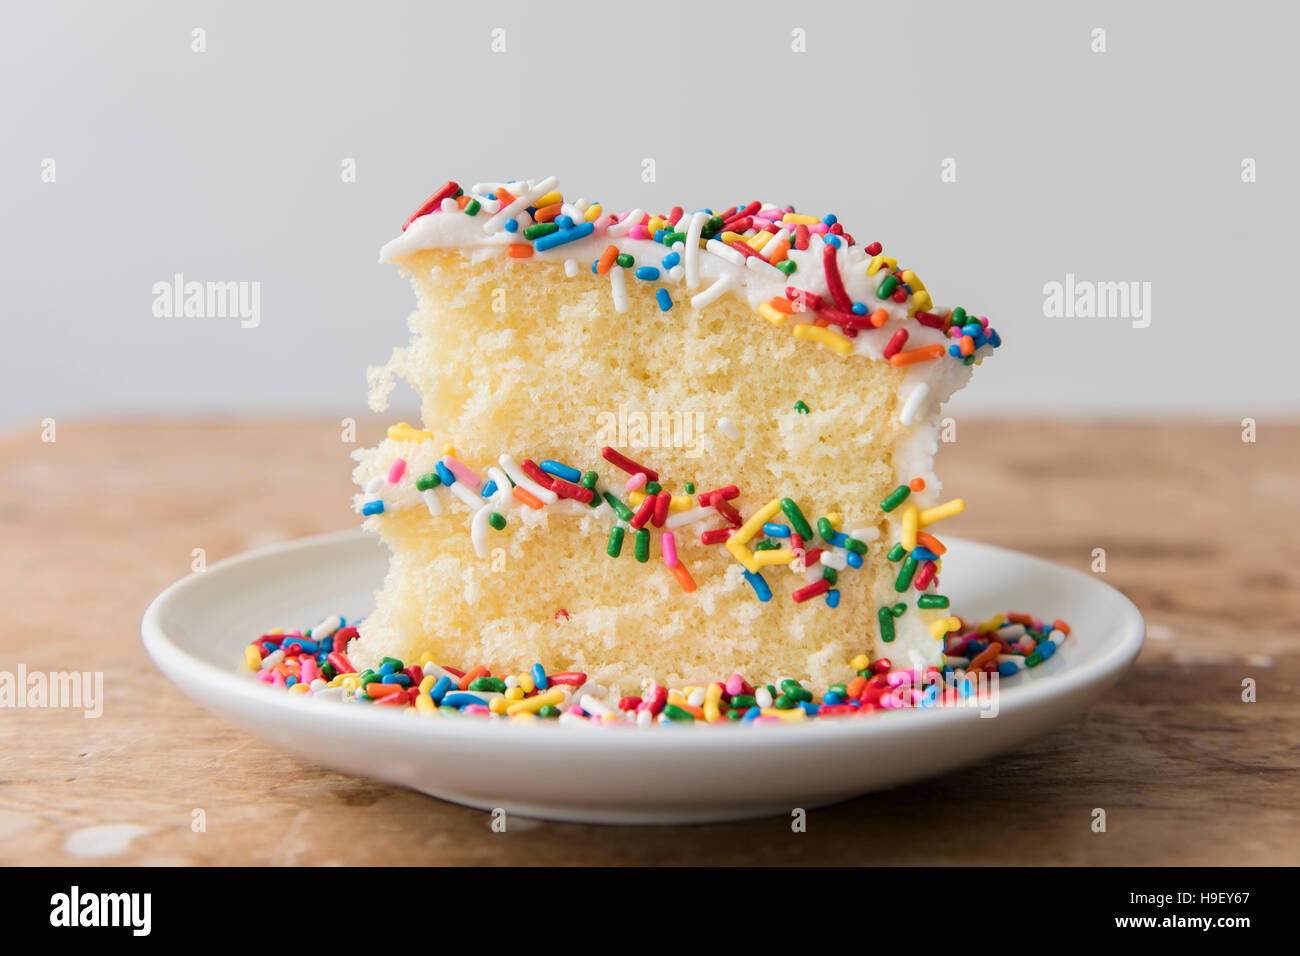 Slice of cake with sprinkles on plate Stock Photo